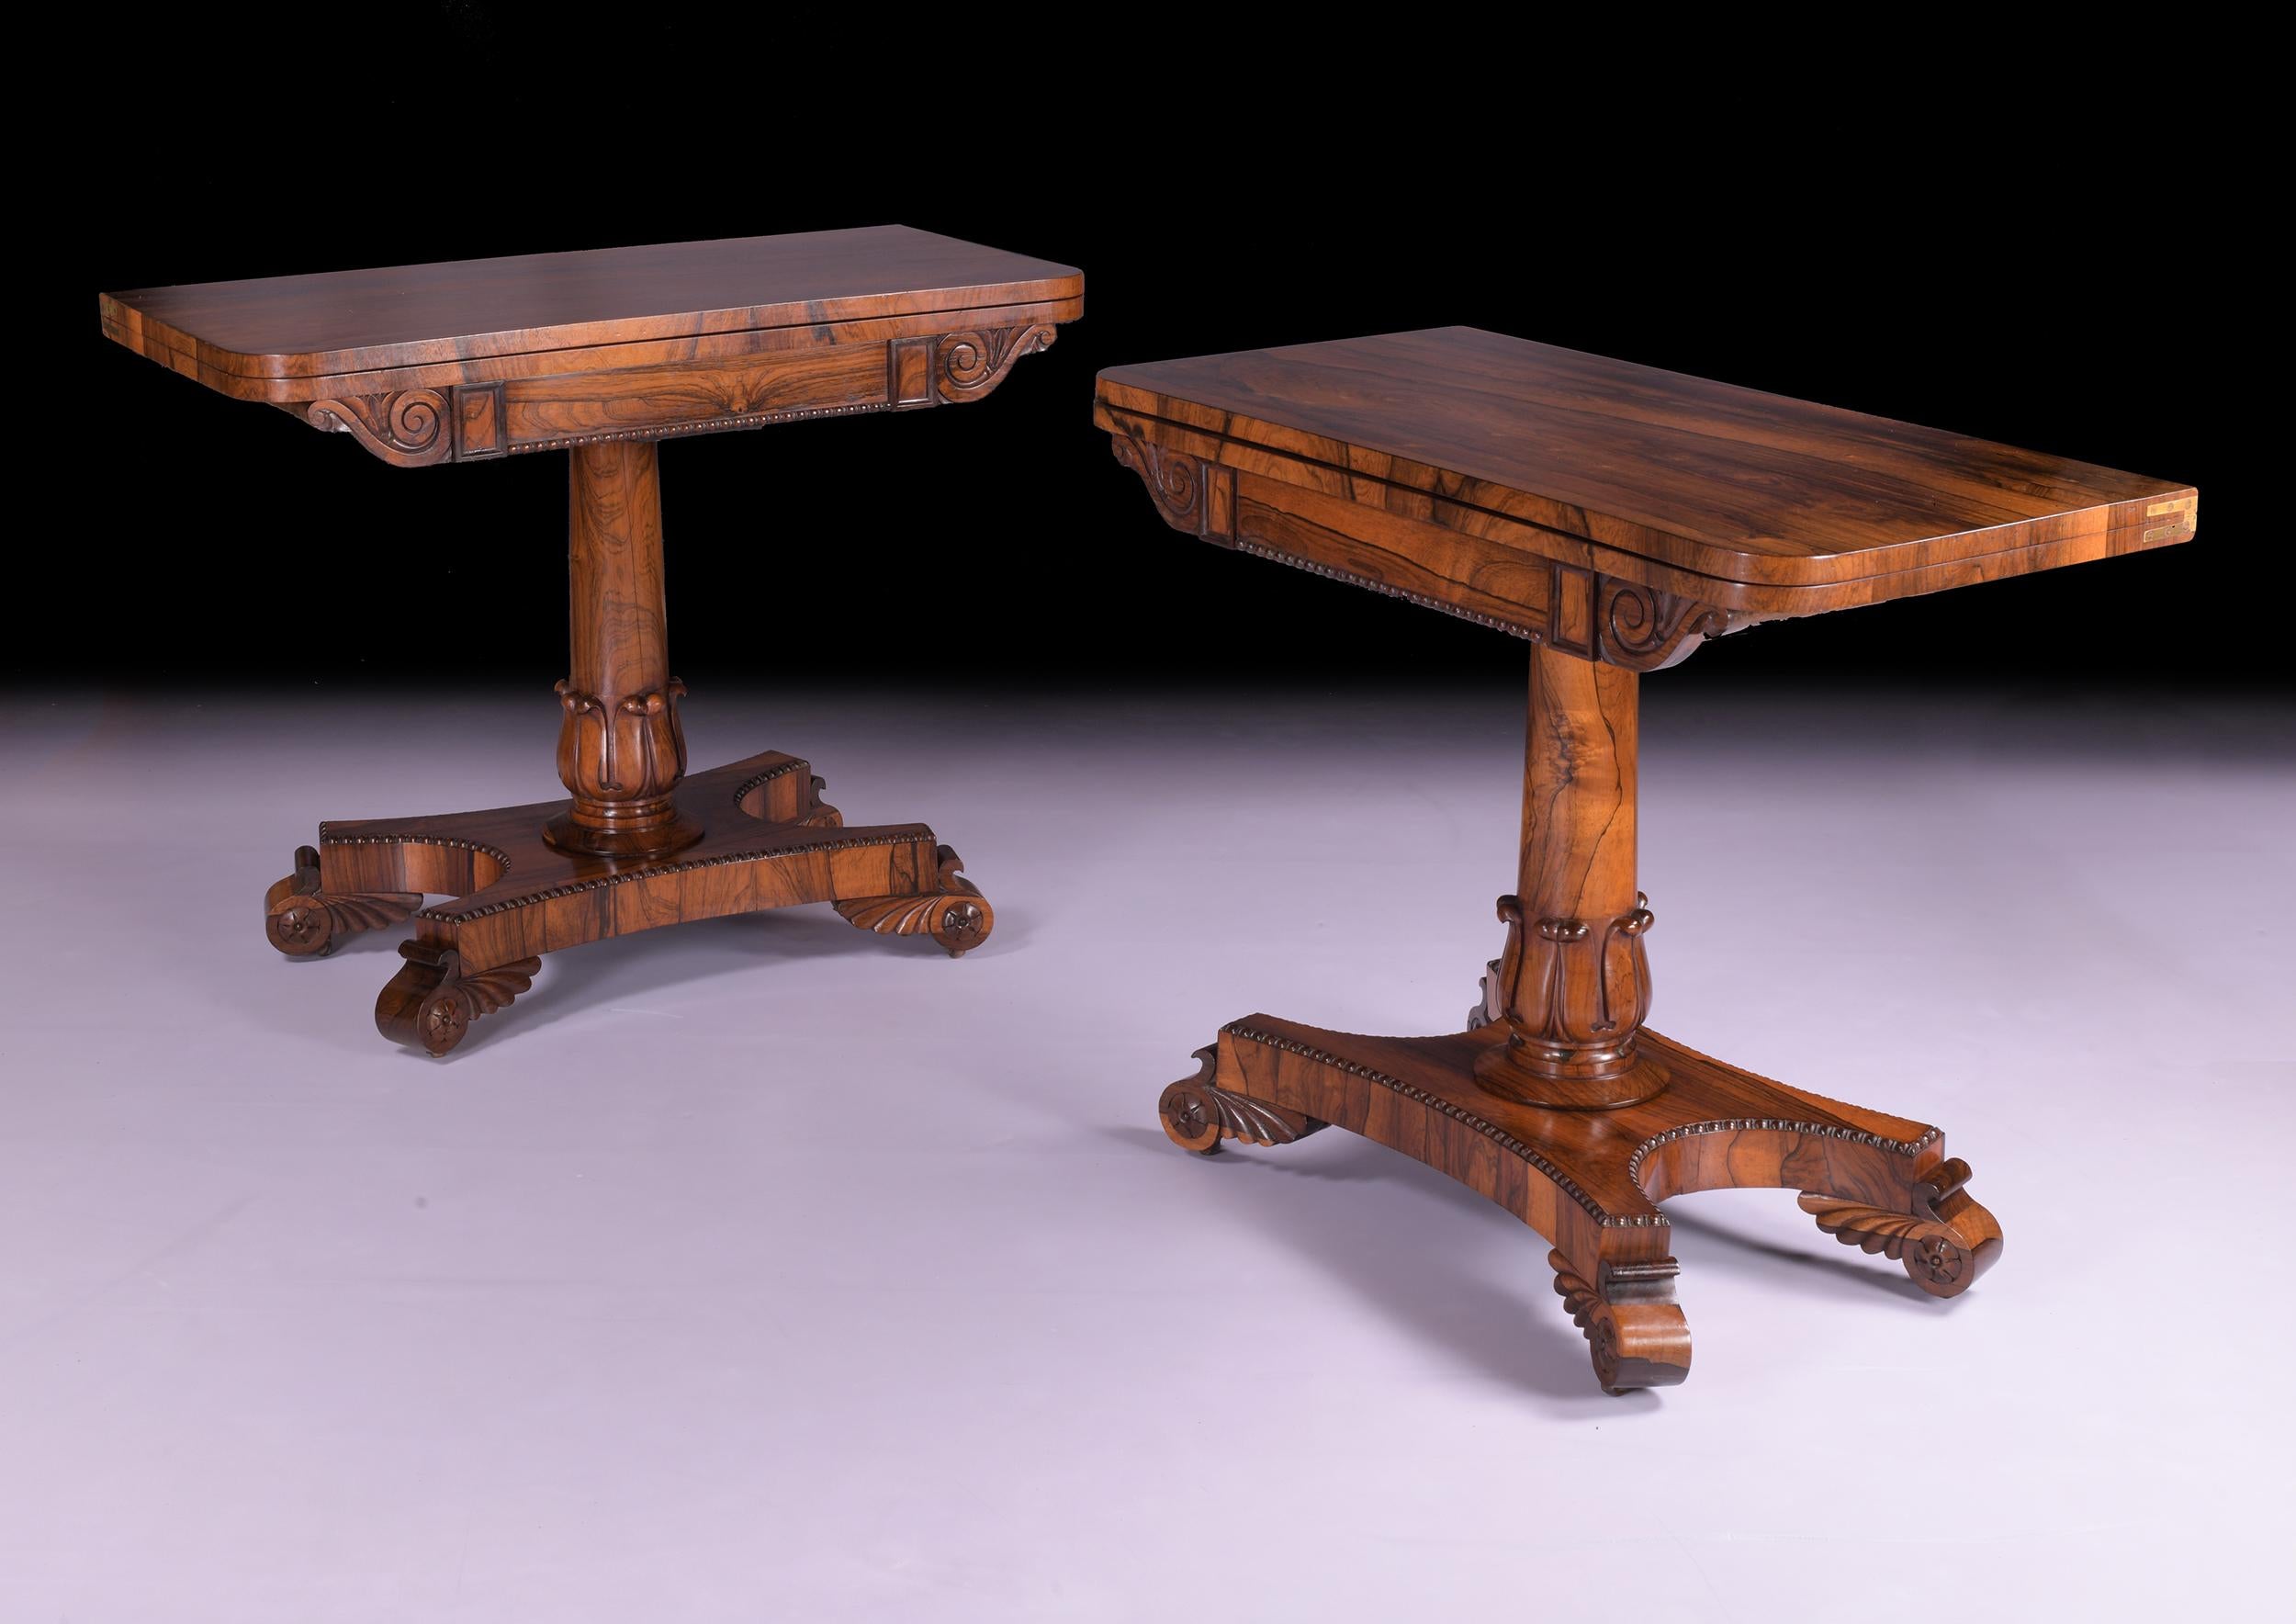 A stunning pair of Regency turnover card / games tables with rounded front corners enclosing a green baize lined interior. Each frieze with a rectangular gadrooned panel on a cylindrical shaft resting on a platform base and carved scroll feet with